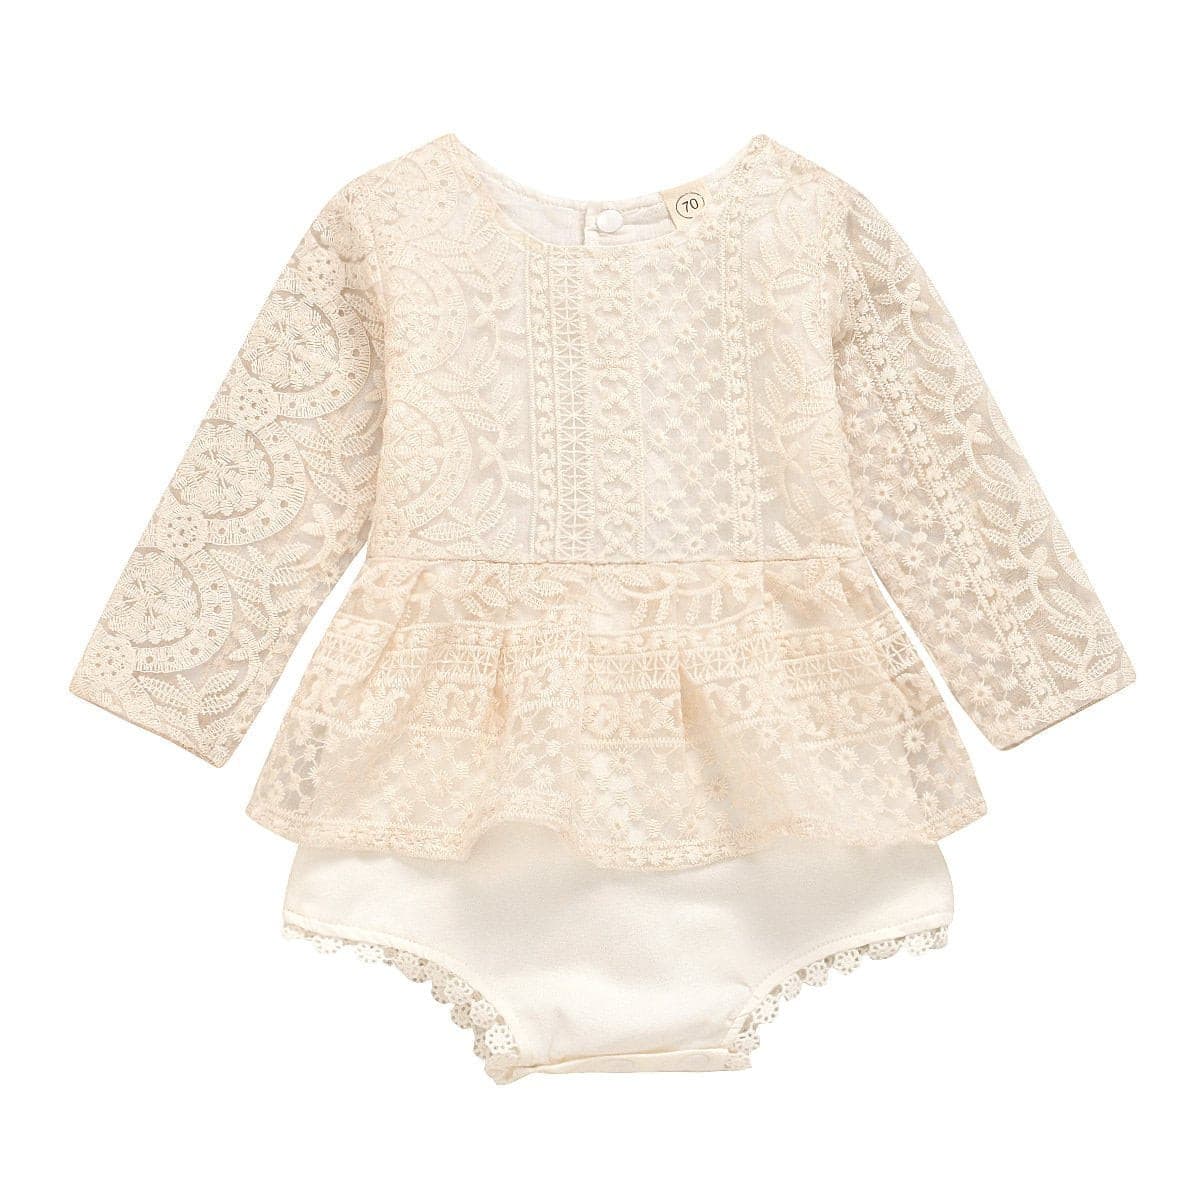 Baby Girl Lace Romper.